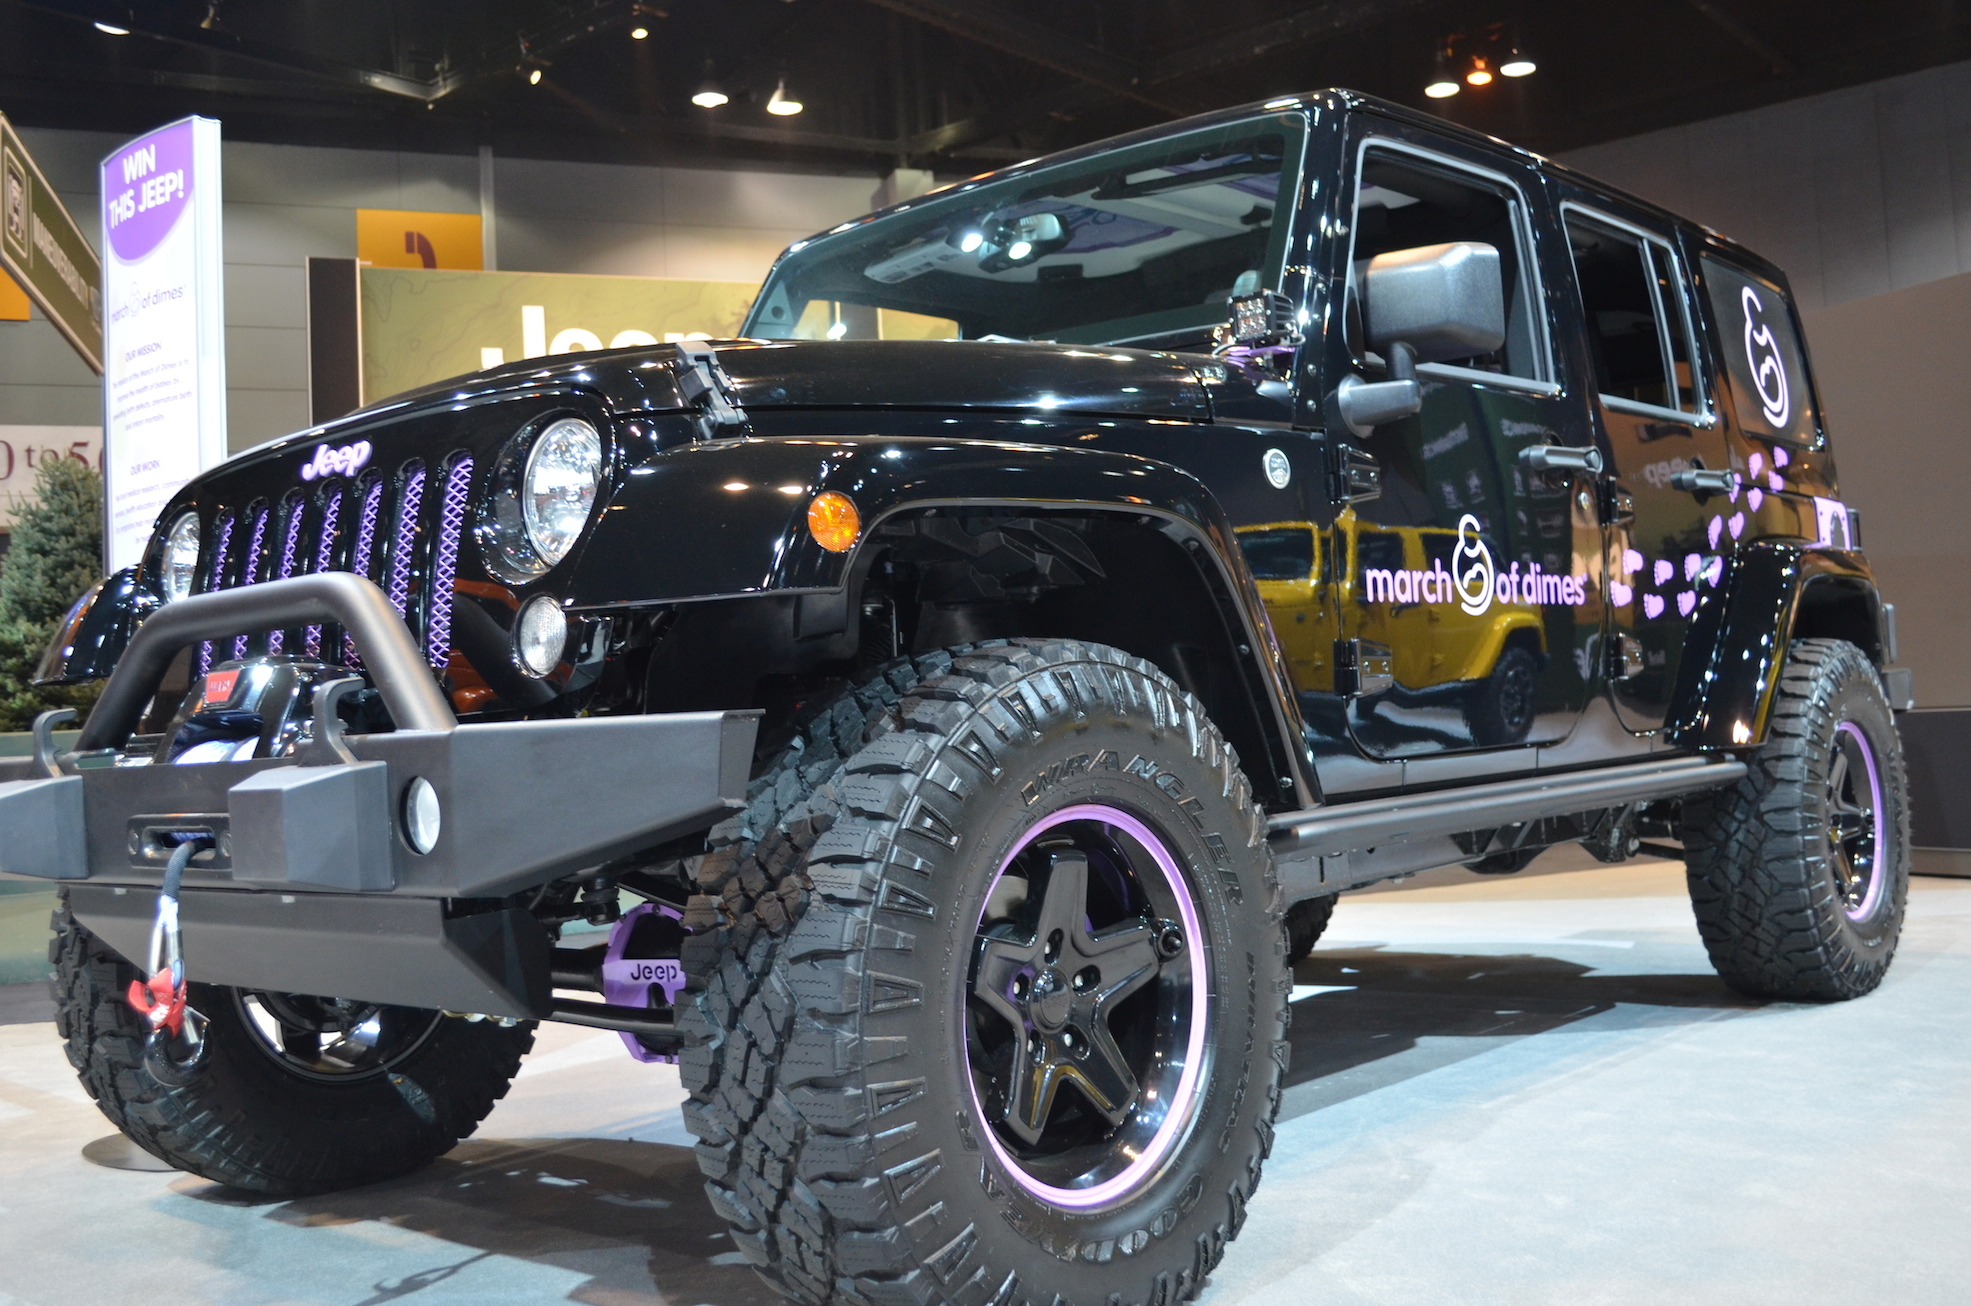 2014 Custom Jeep Wrangler for March of Dimes